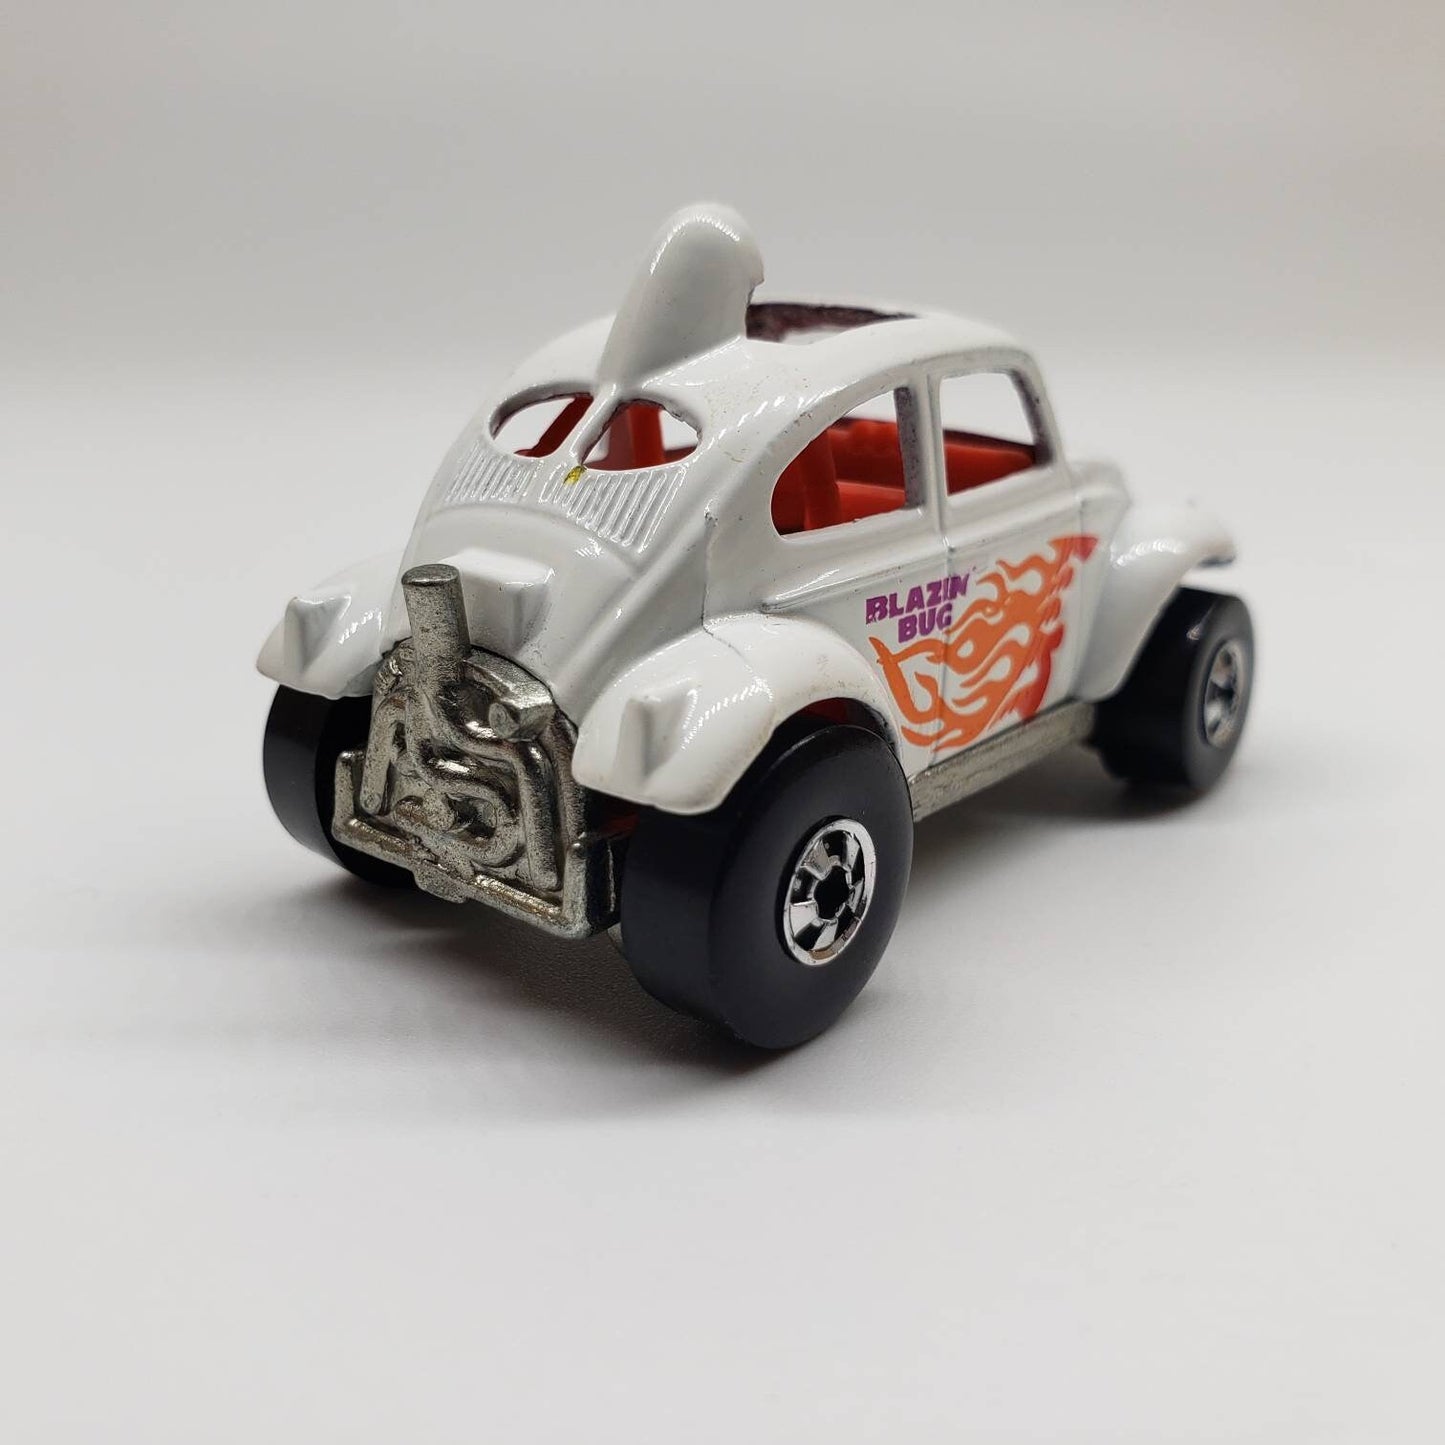 Hot Wheels Baja Bug White Mainline Perfect Birthday Gift Miniature Collectable Scale Model Toy Car